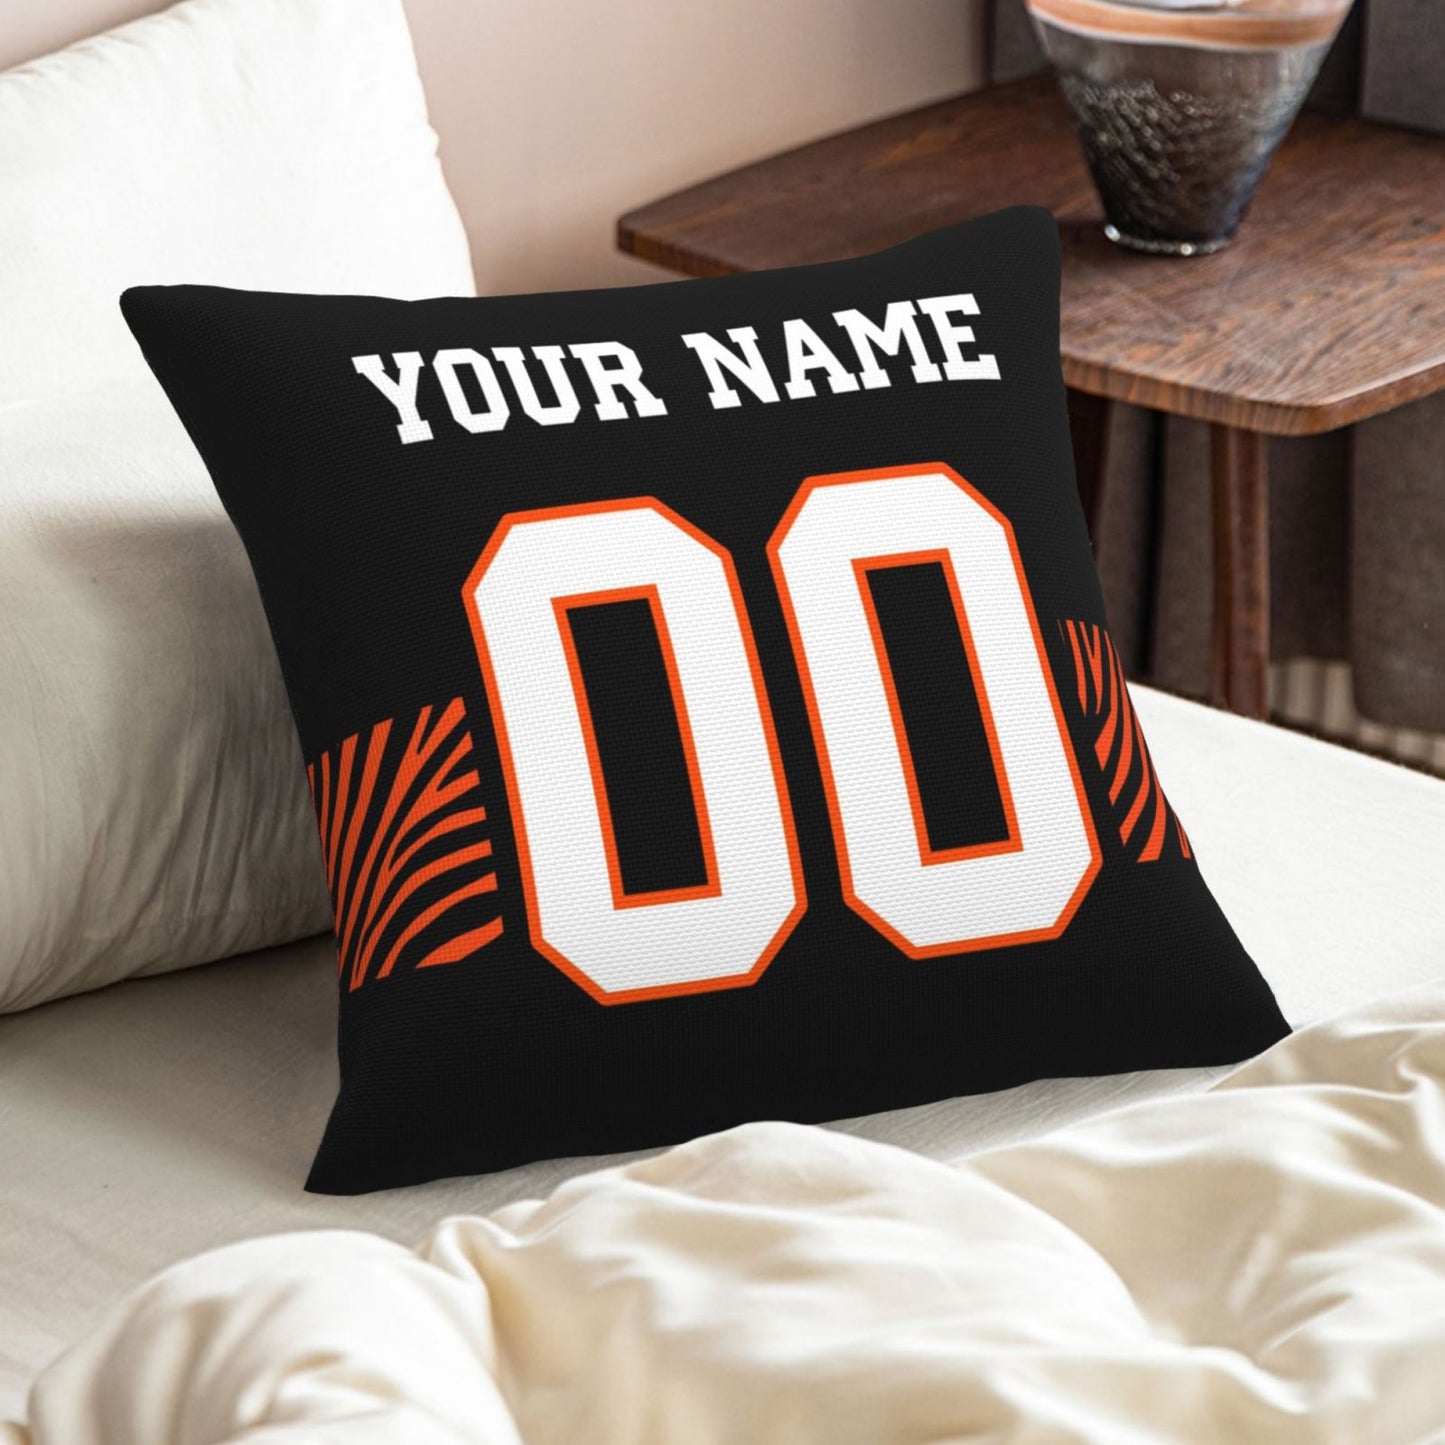 Customized Cincinnati Bengals Black Football Team Decorative Throw Pillow Case Print Personalized Football Style Fans Letters & Number Pillowcase Birthday Gift